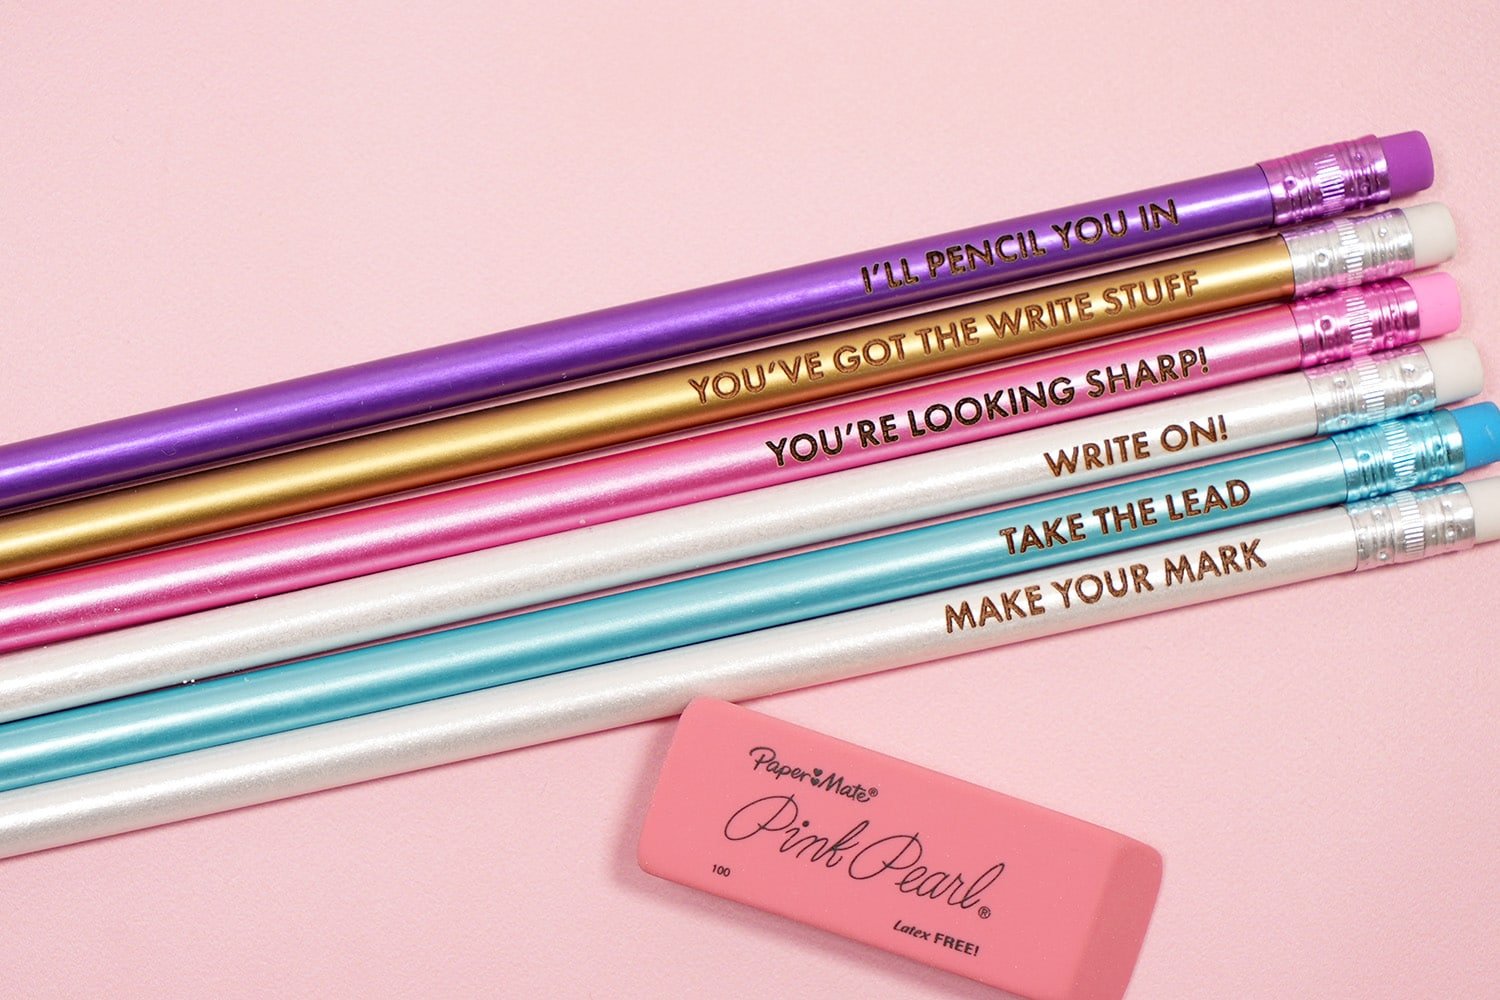 Colorful engraved pencils with pencil puns on a pink background with pink eraser